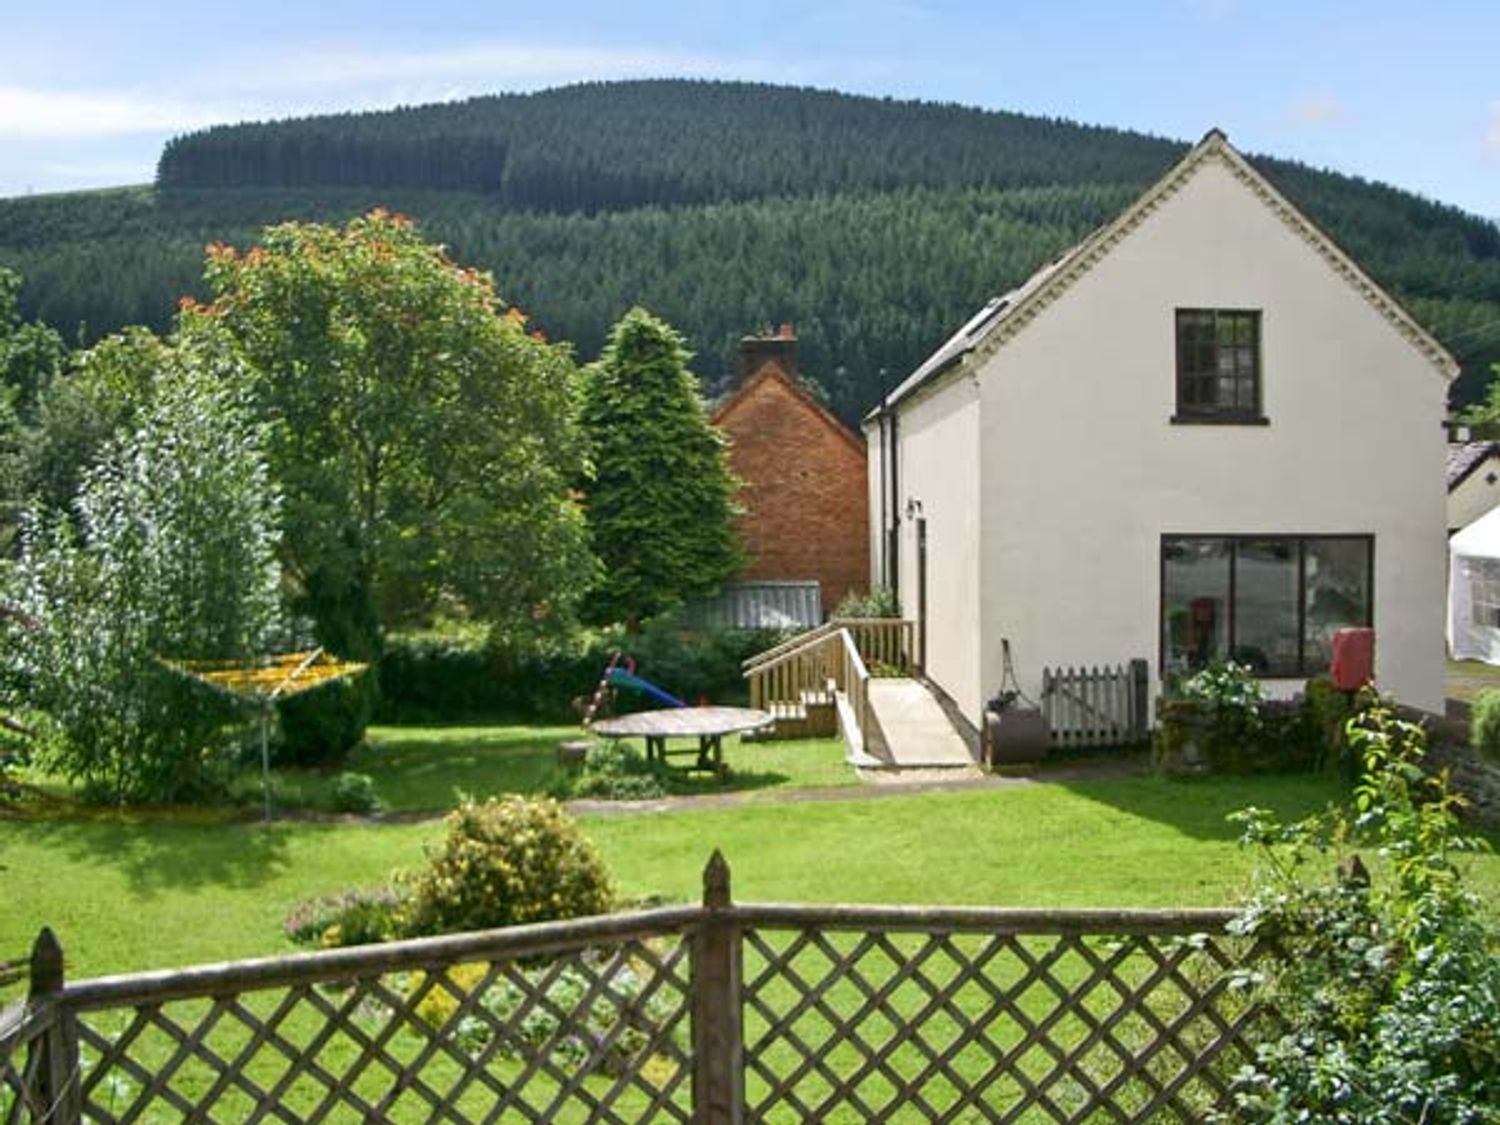 Tailor's Cottage - Mid Wales - 11414 - photo 1